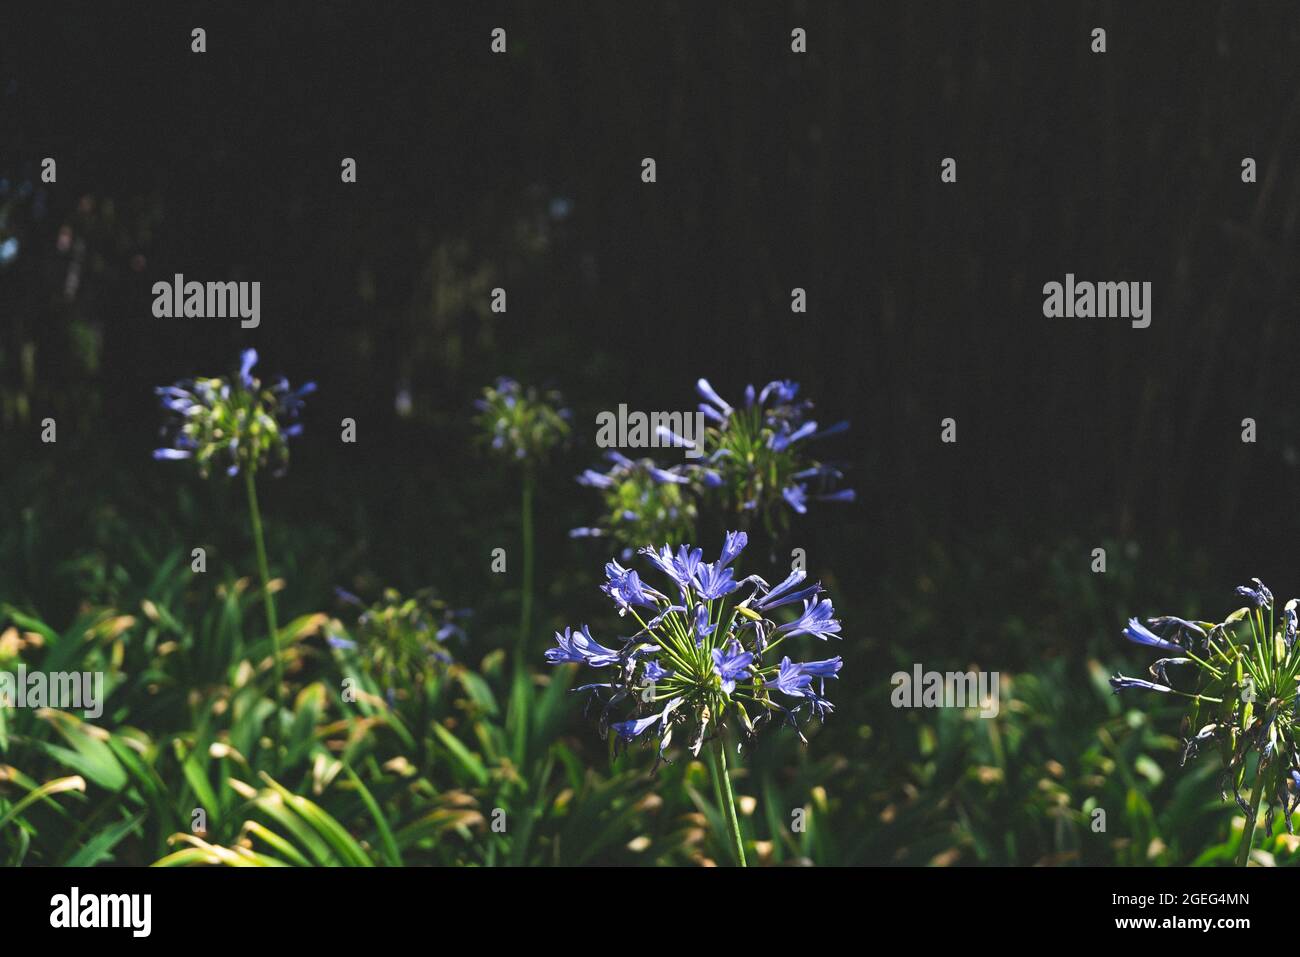 Selective focus shot of beautiful Agapanthus or Lily of the Nile flowers in the garden Stock Photo